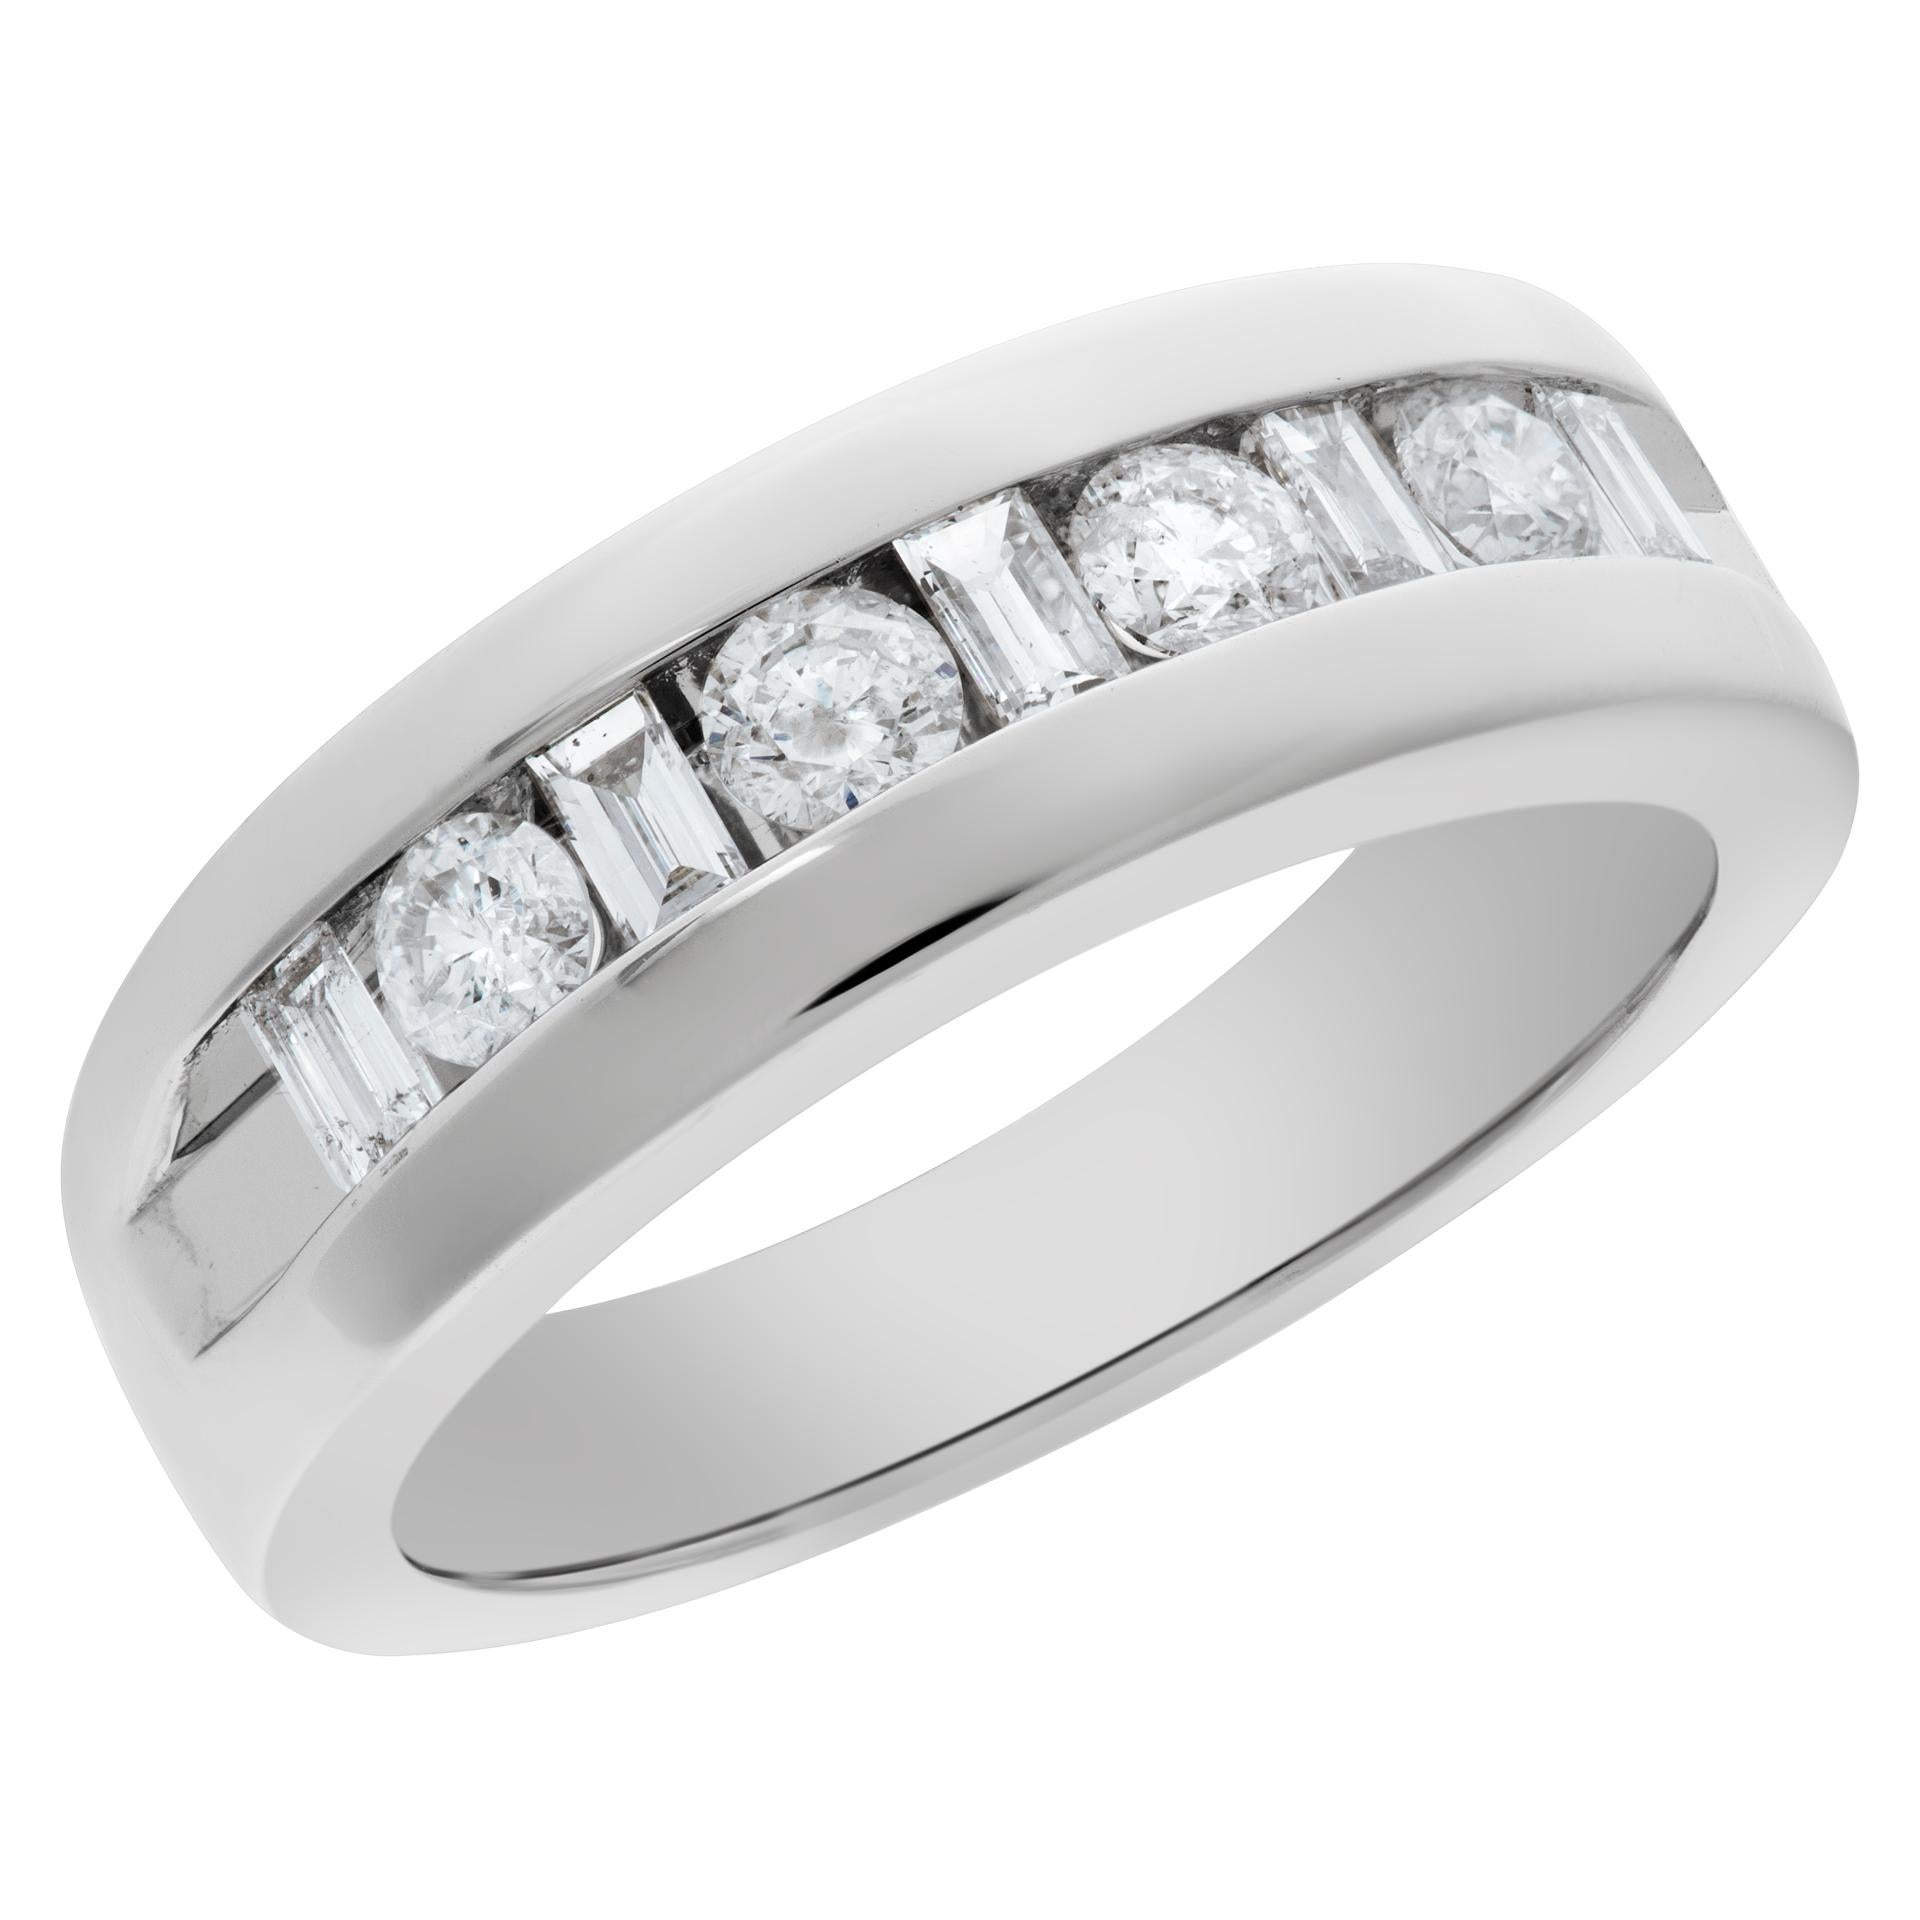 Semi Eternity Diamond Ring in 14k White Gold In Excellent Condition For Sale In Surfside, FL